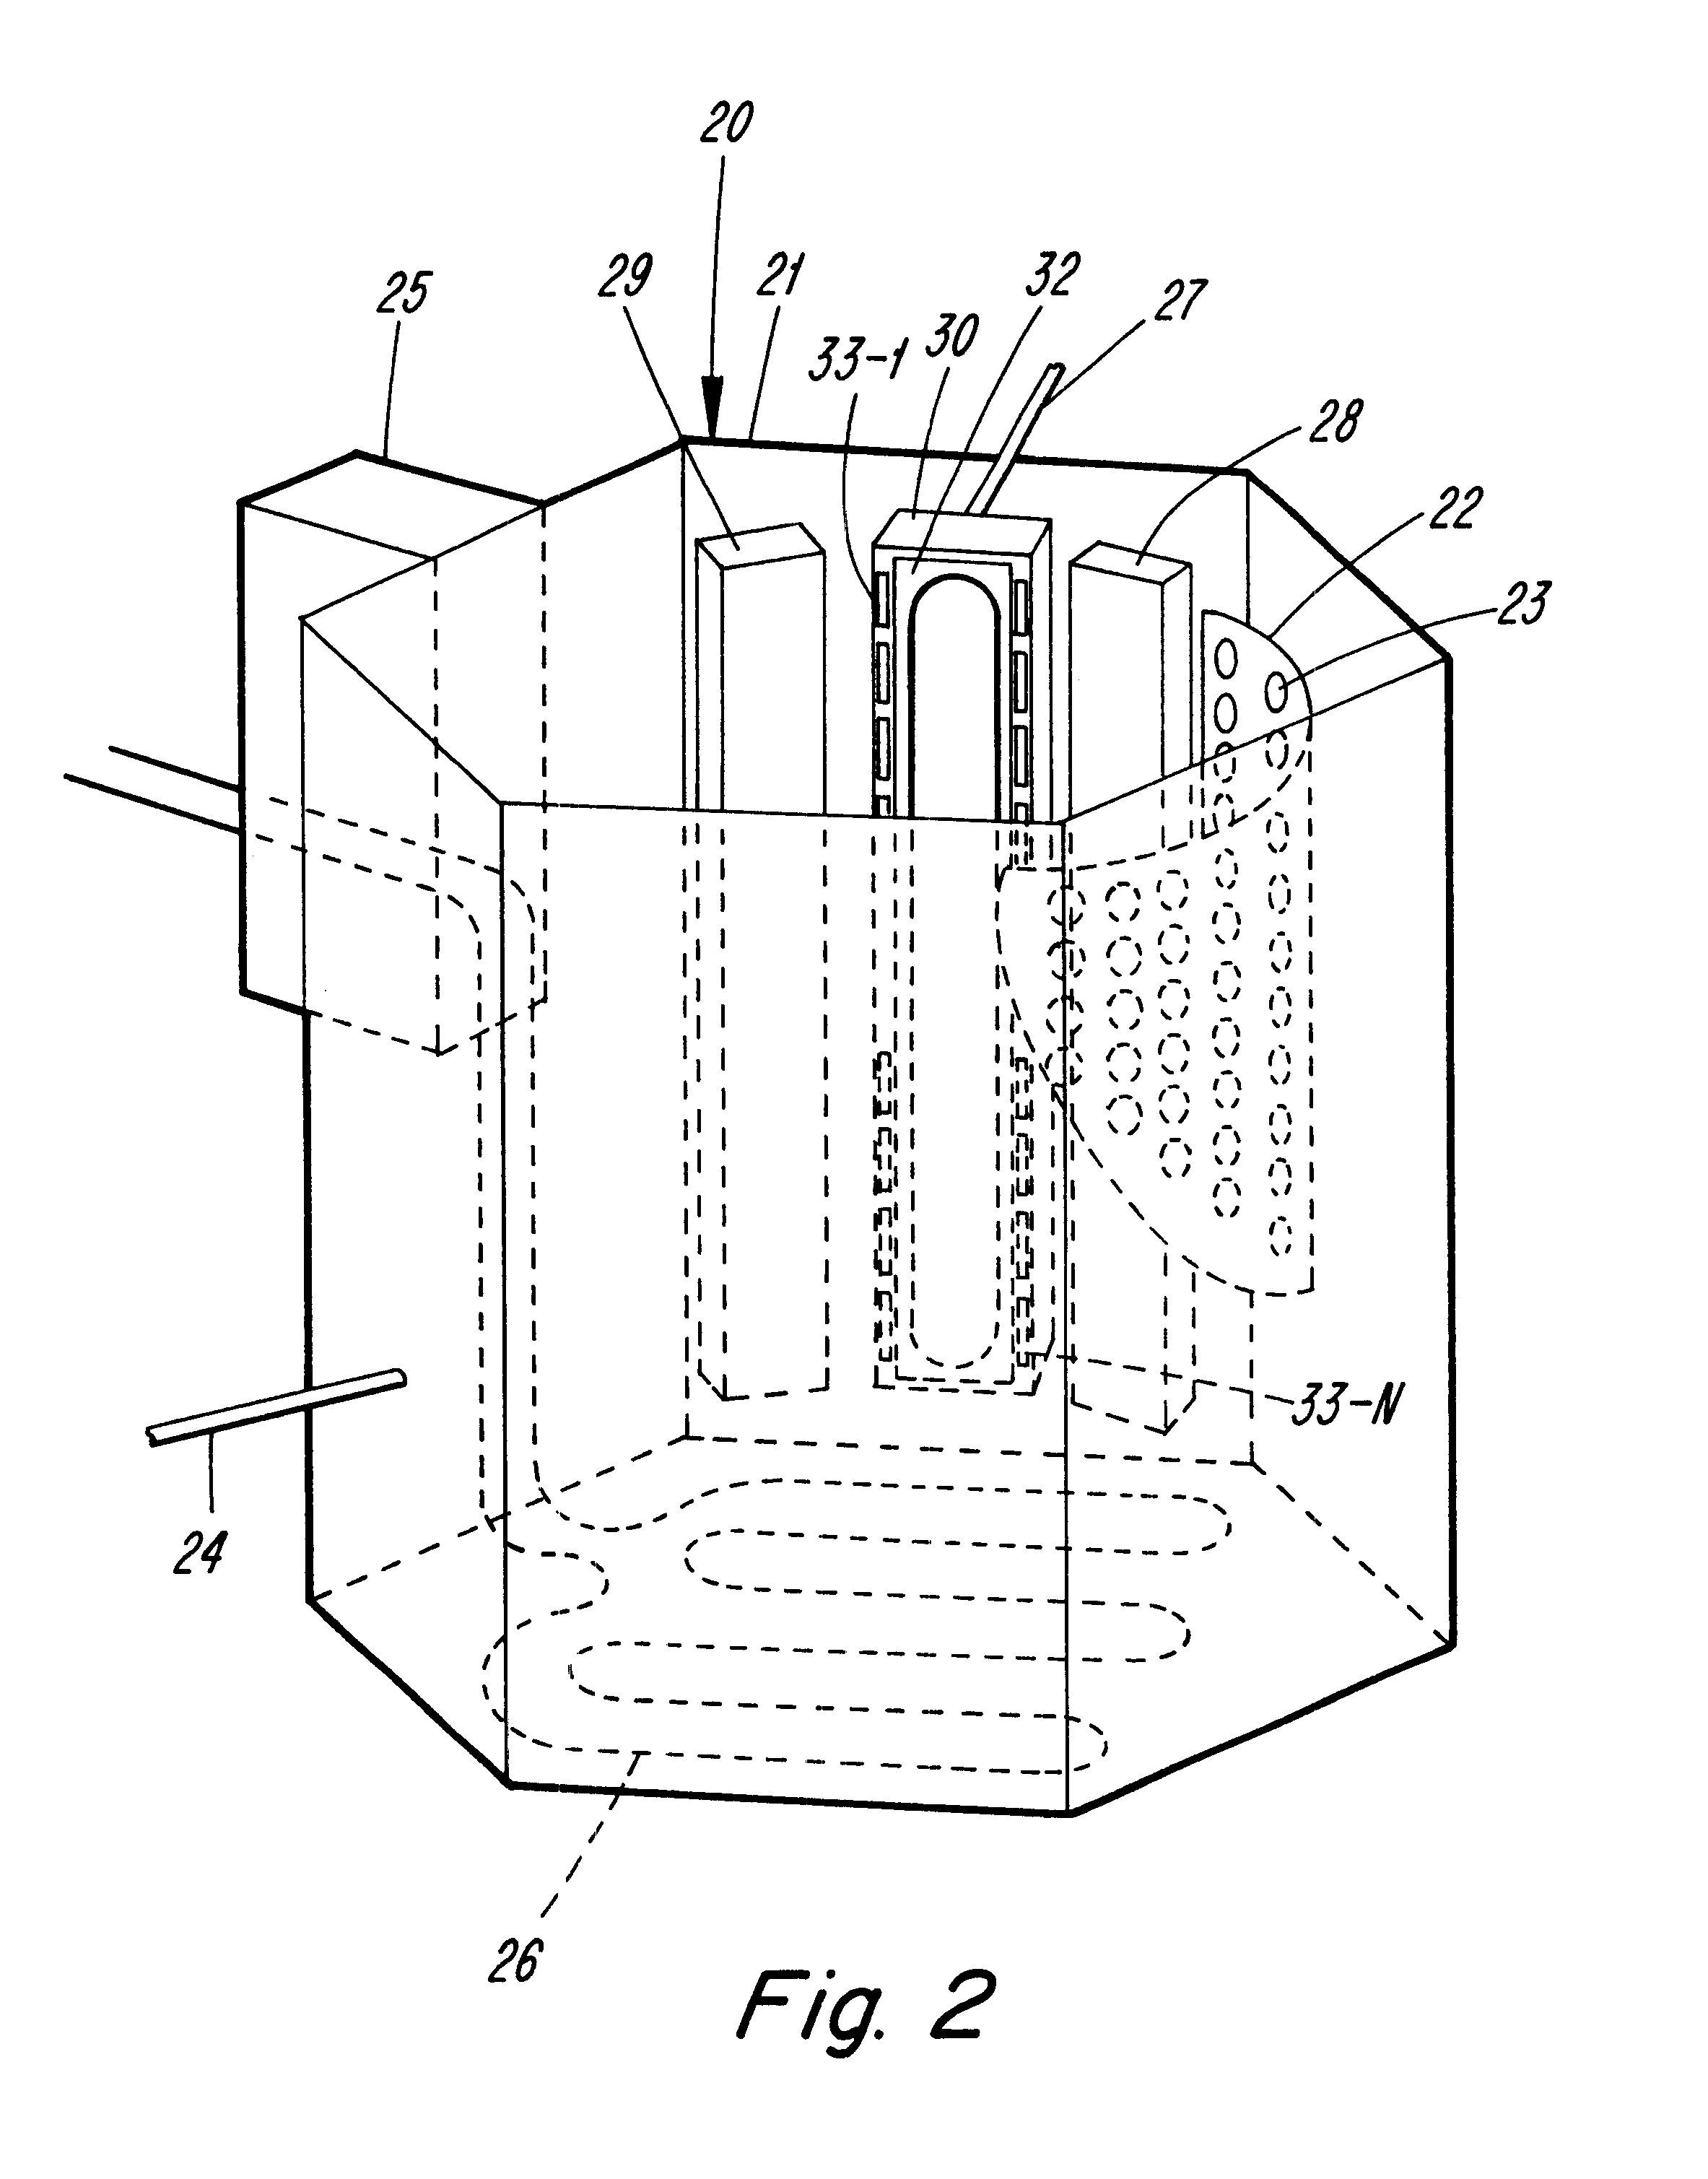 Multi-anode device and methods for sputter deposition